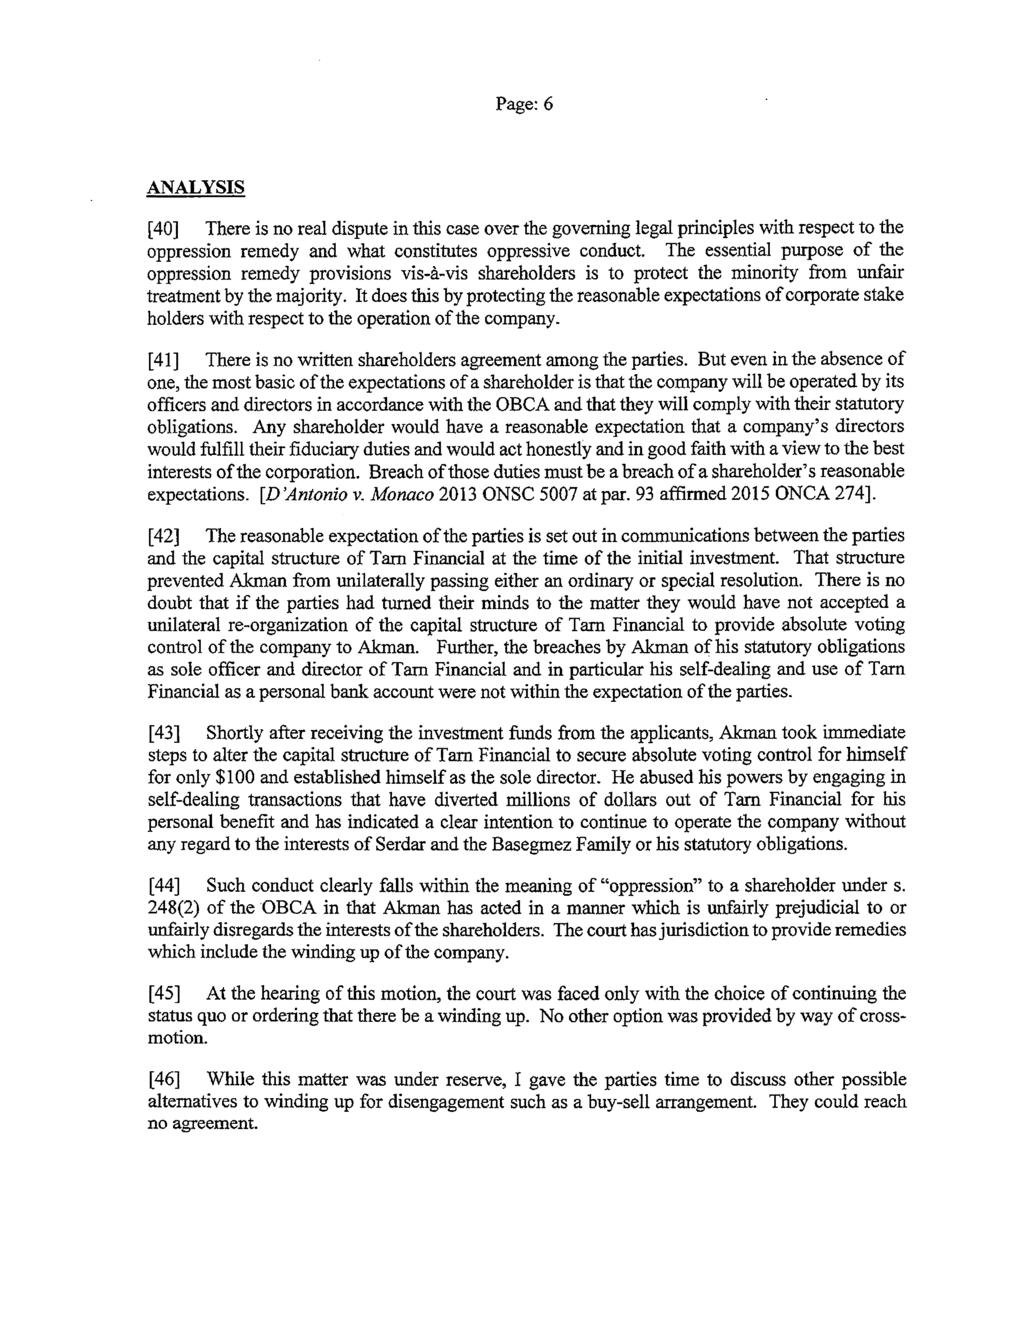 Page:6 ANALYSIS [ 40] There is no real dispute in this case over the governing legal principles with respect to the oppression remedy and what constitutes oppressive conduct.